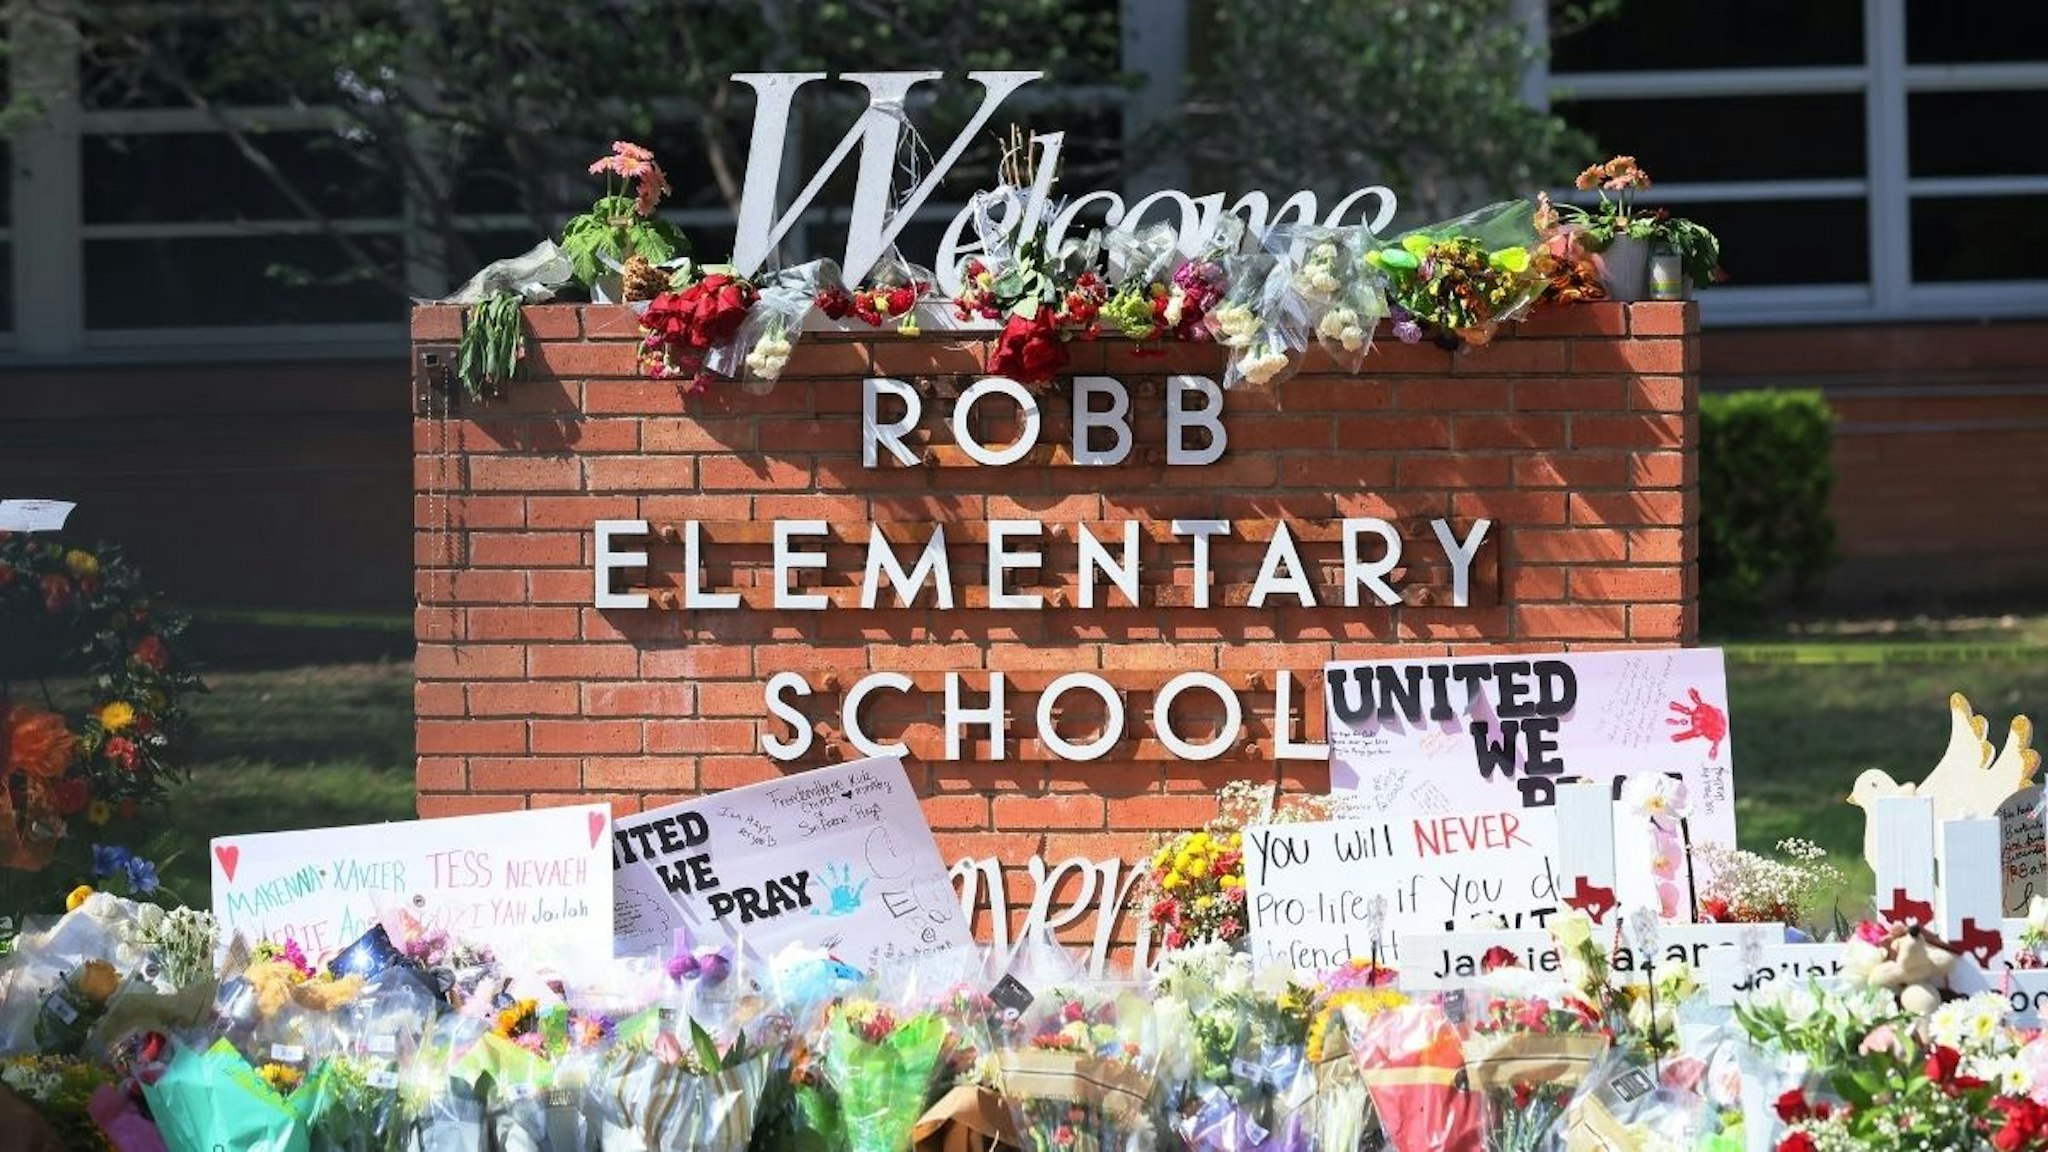 A memorial for victims of Tuesday's mass shooting at Robb Elementary School is seen on May 27, 2022 in Uvalde, Texas.